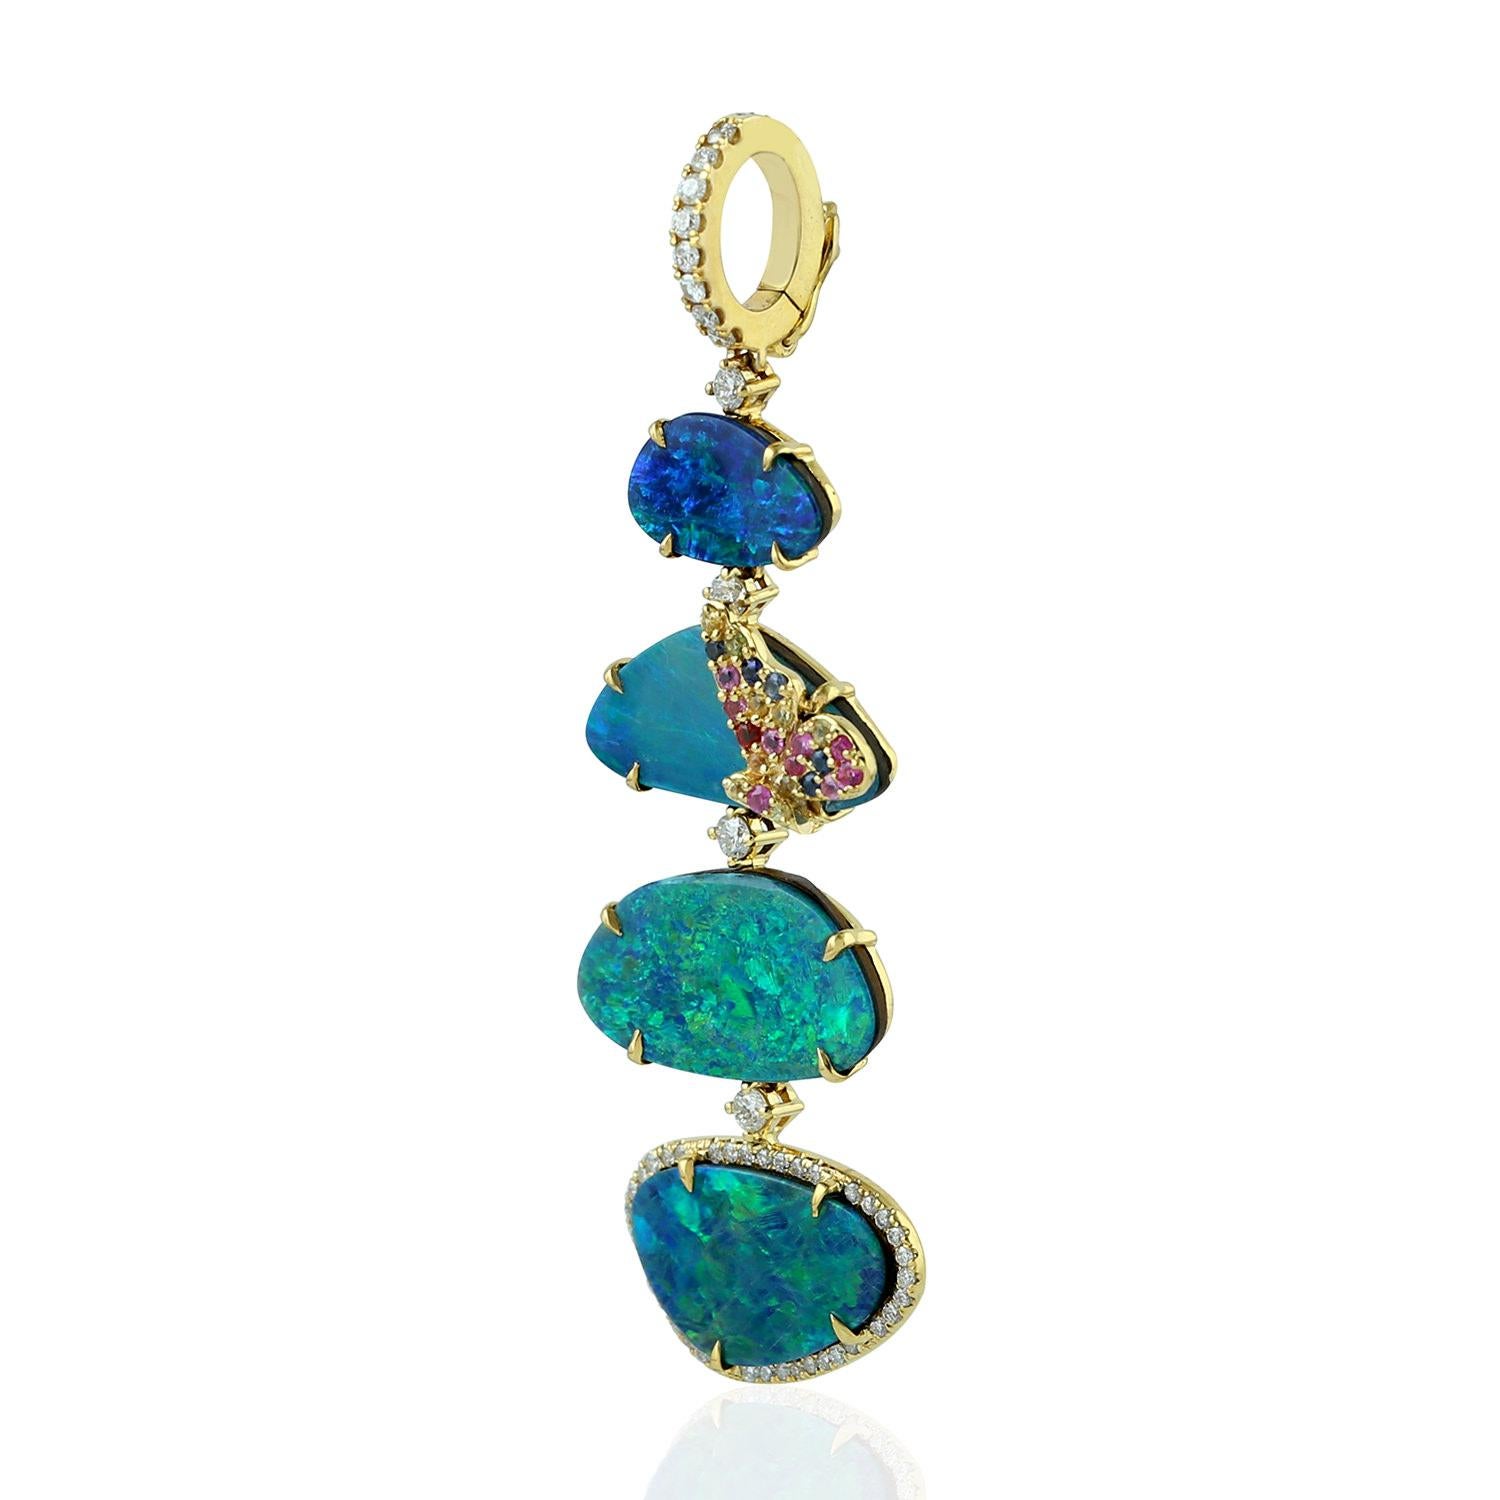 Cast in 18 Karat gold, this beautiful pendant features 6.92 carats opal, .20 carats sapphire & .36 carats of sparkling diamonds.  See other opal collection matching pieces.

FOLLOW  MEGHNA JEWELS storefront to view the latest collection & exclusive